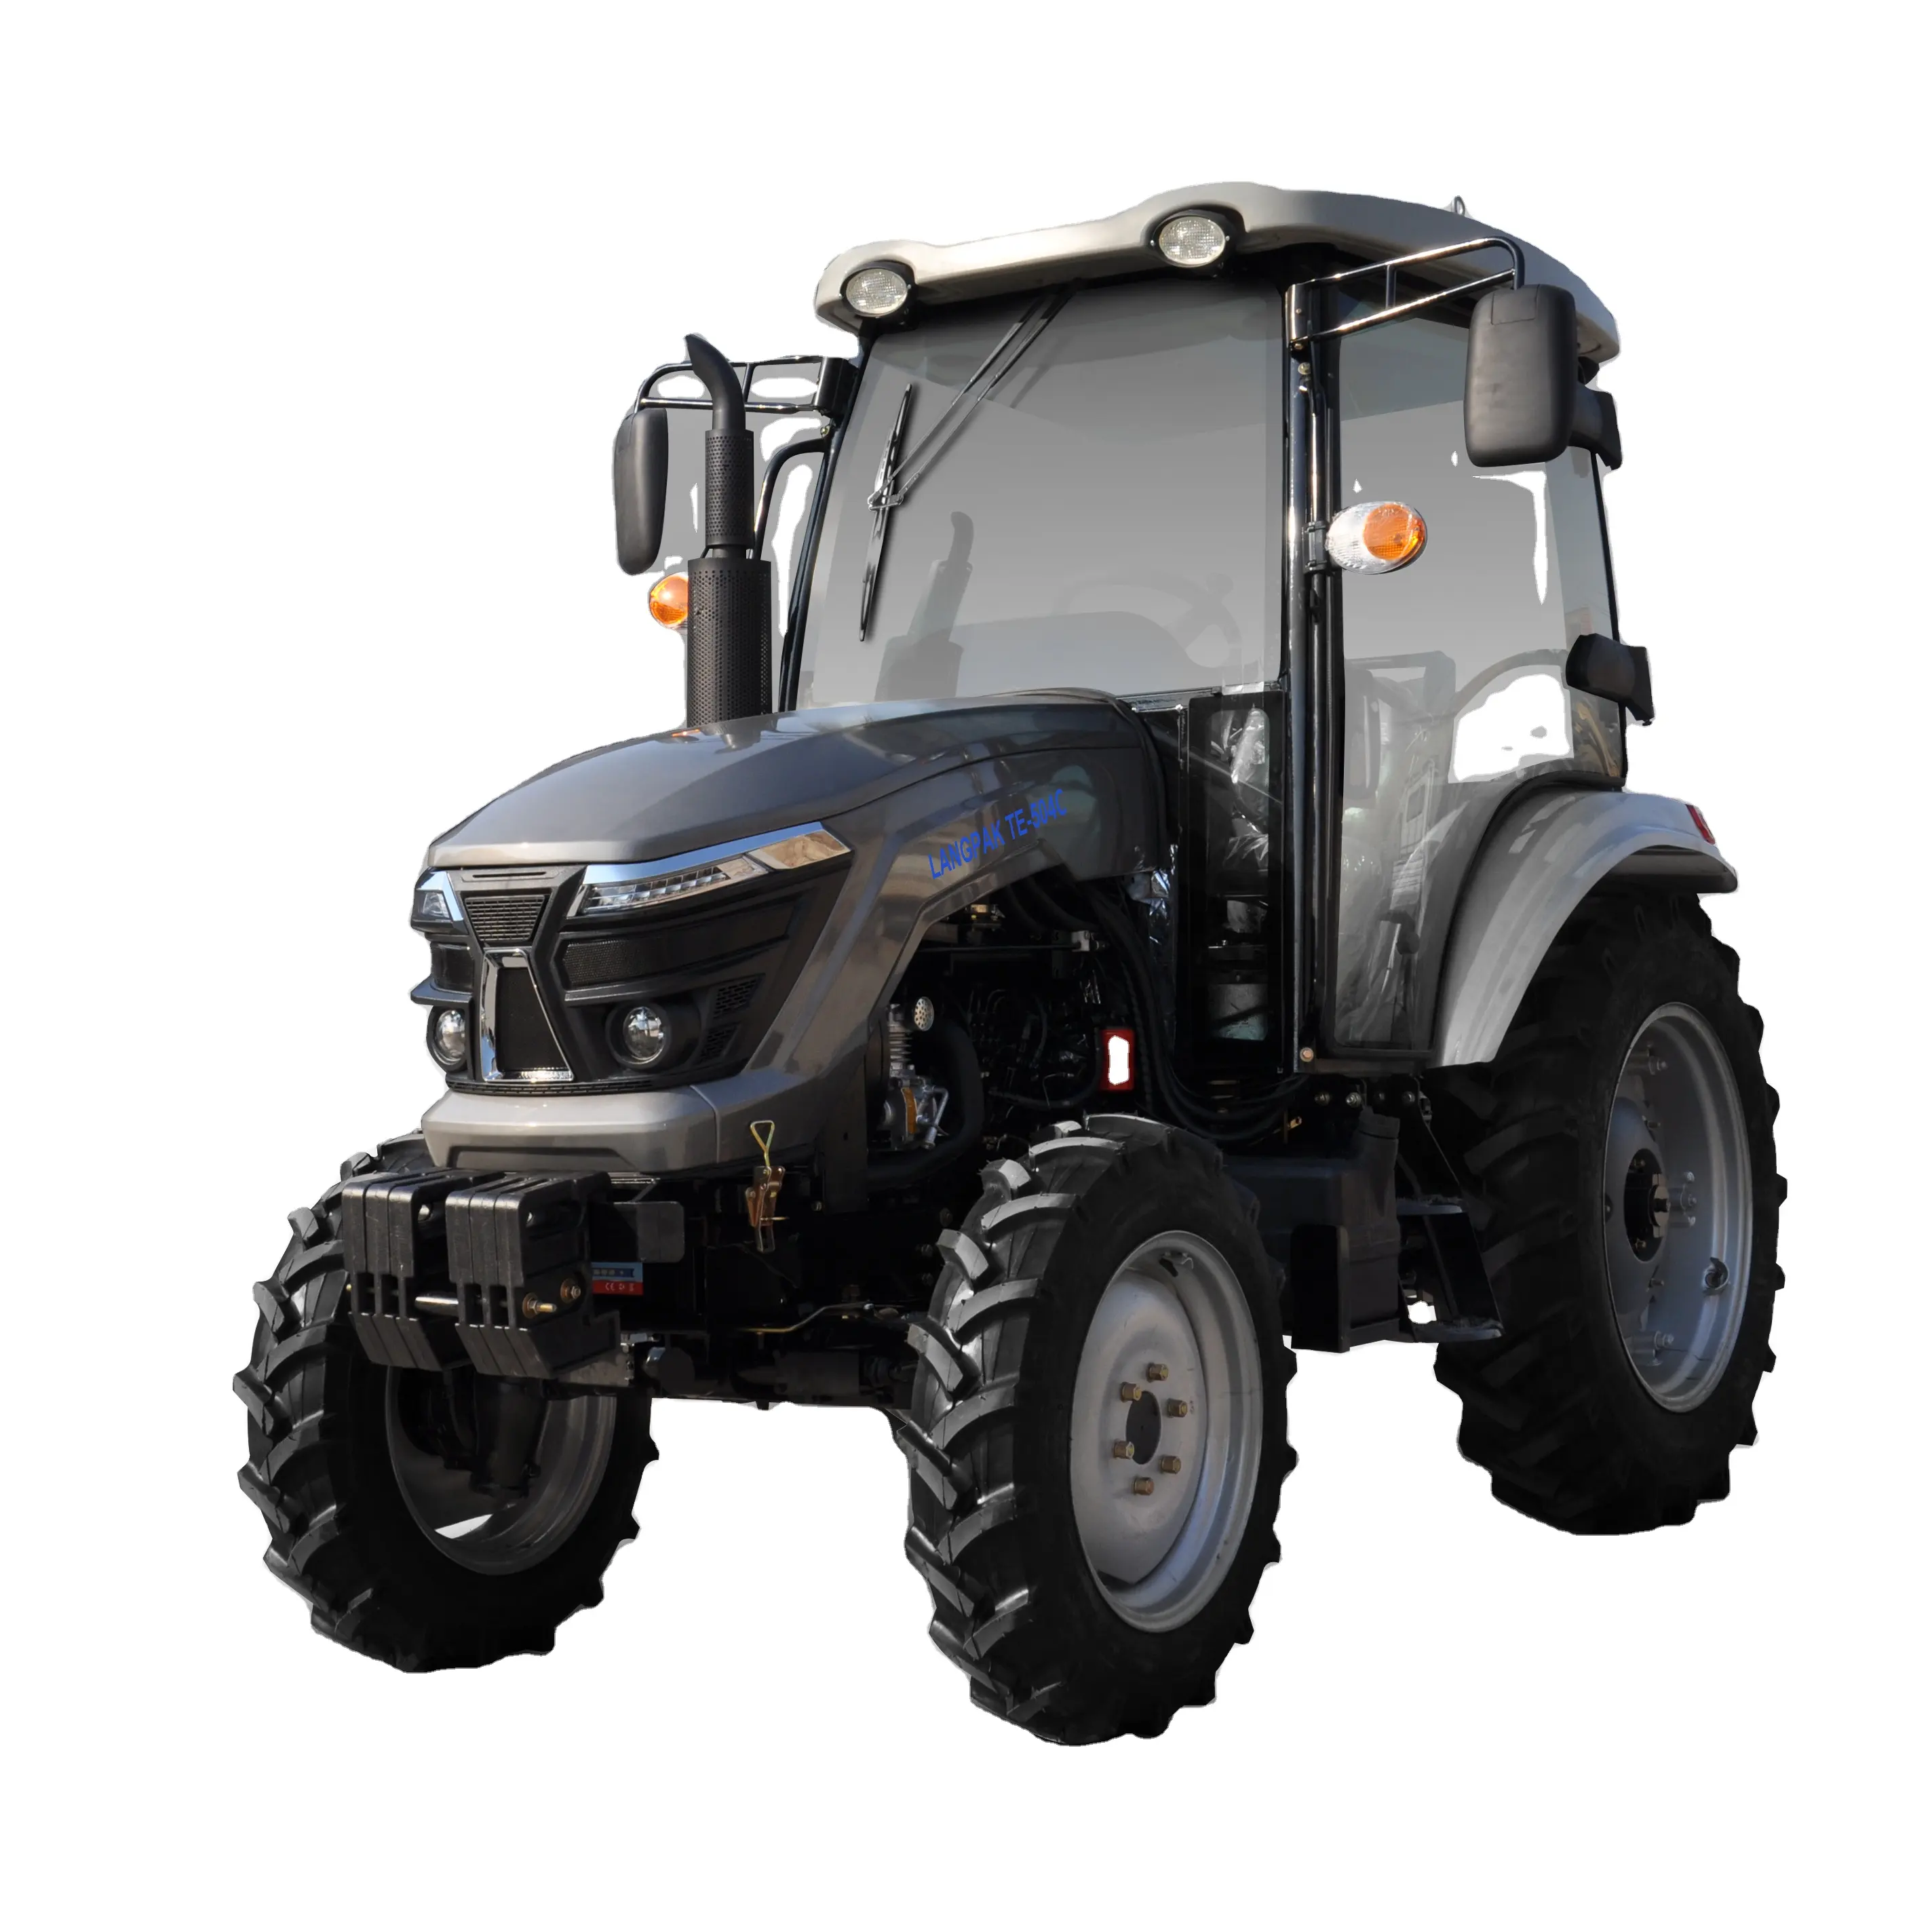 Review of the SAILLONG/LOVOL/DONGFENG TE-504C tractor - new for 2023